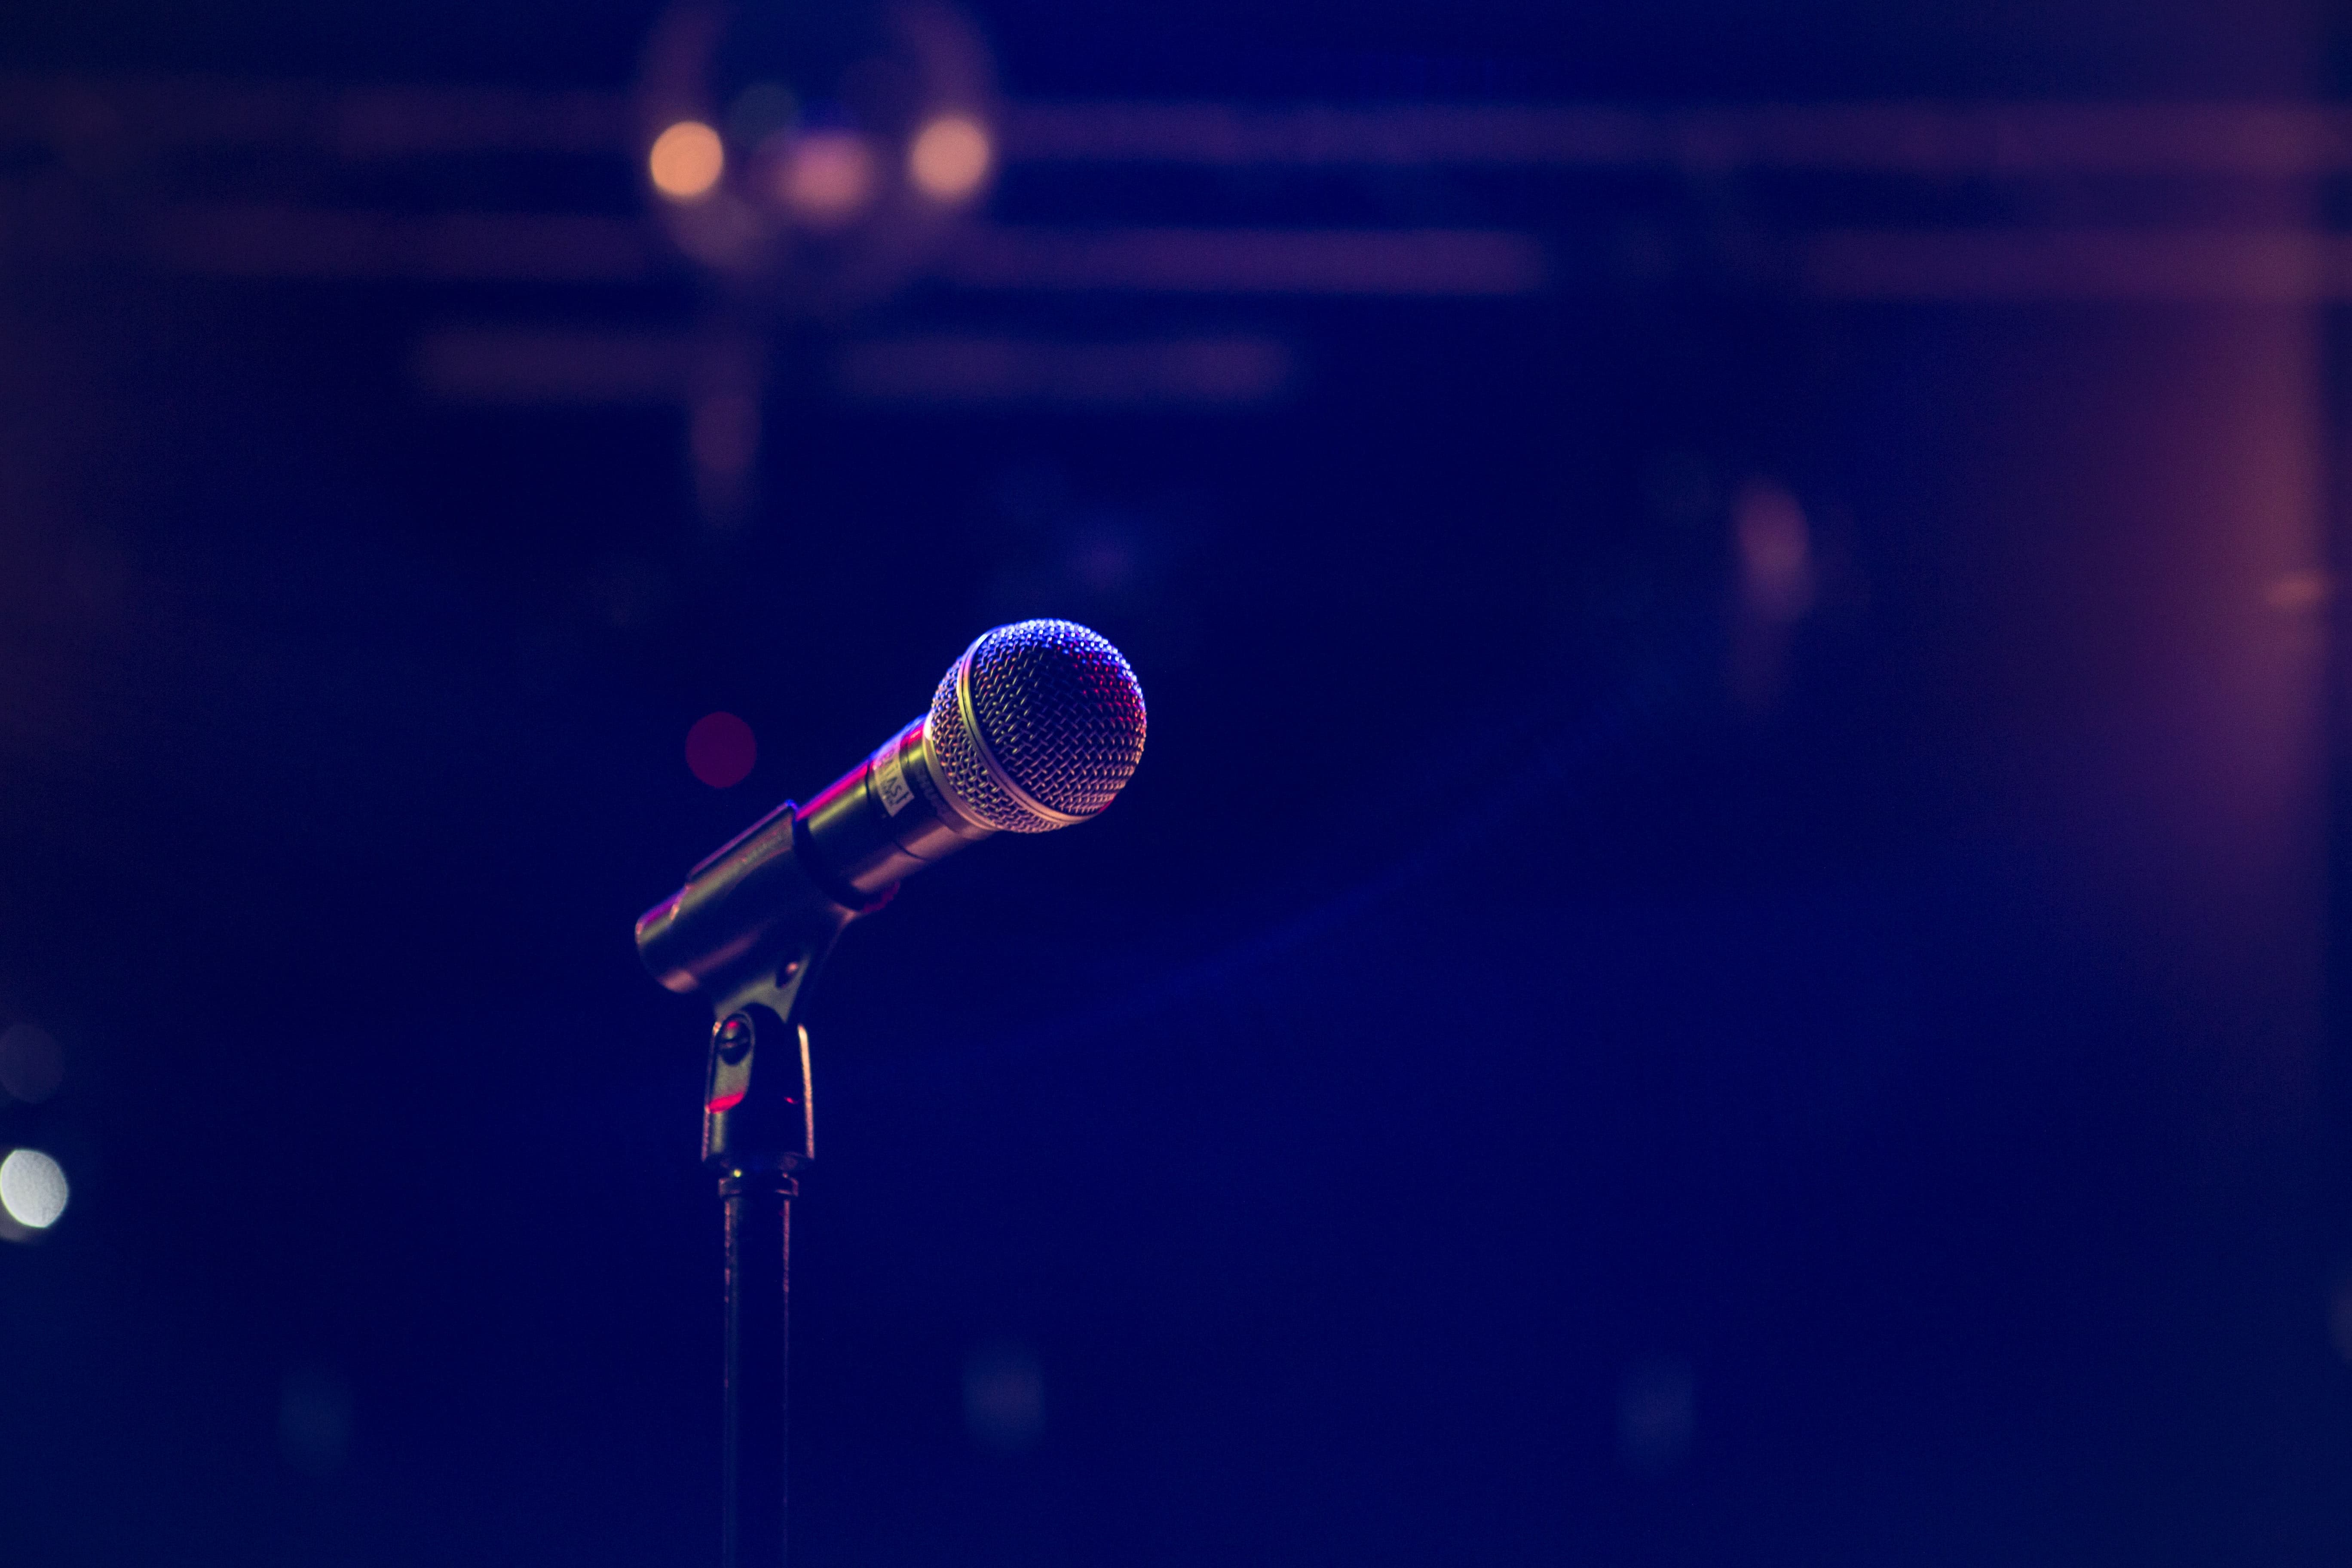 A microphone on a stand set along on a dramatically lit stage